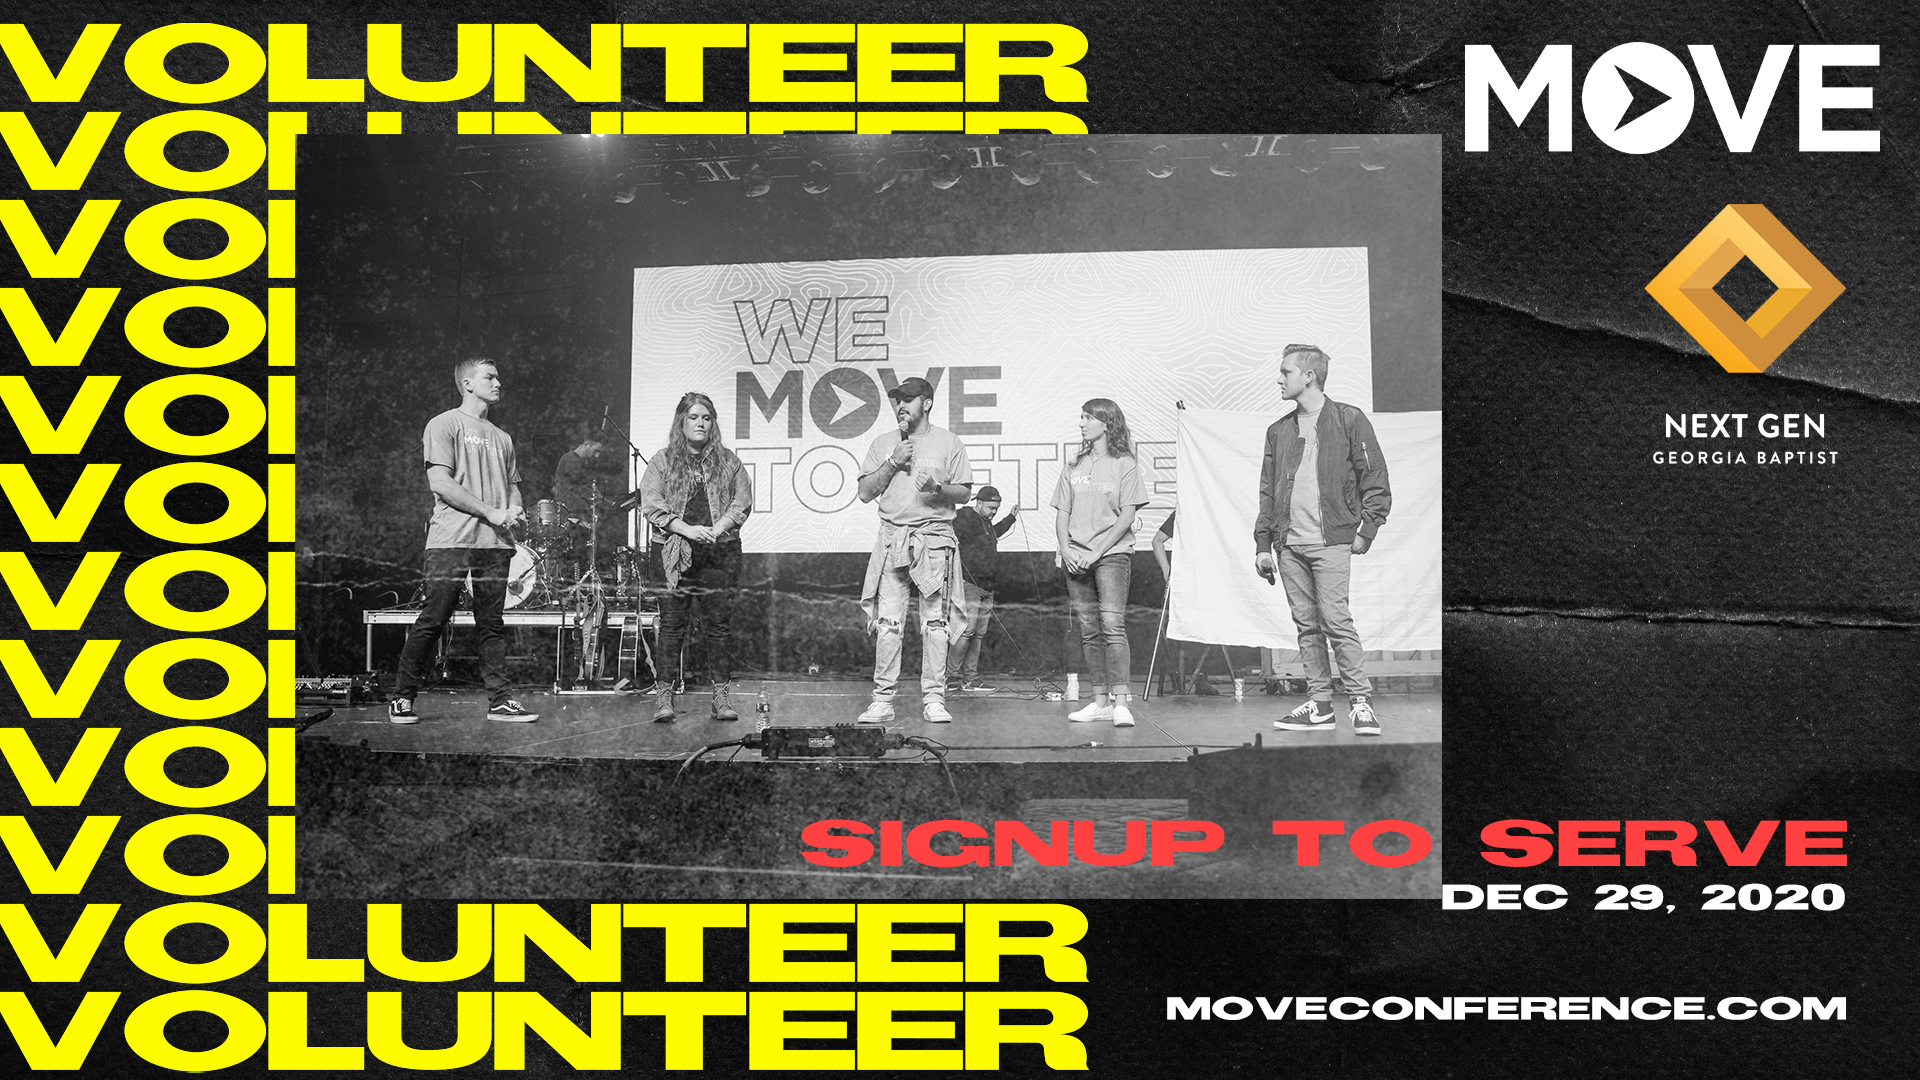 Volunteer at MOVE MOVE Conference